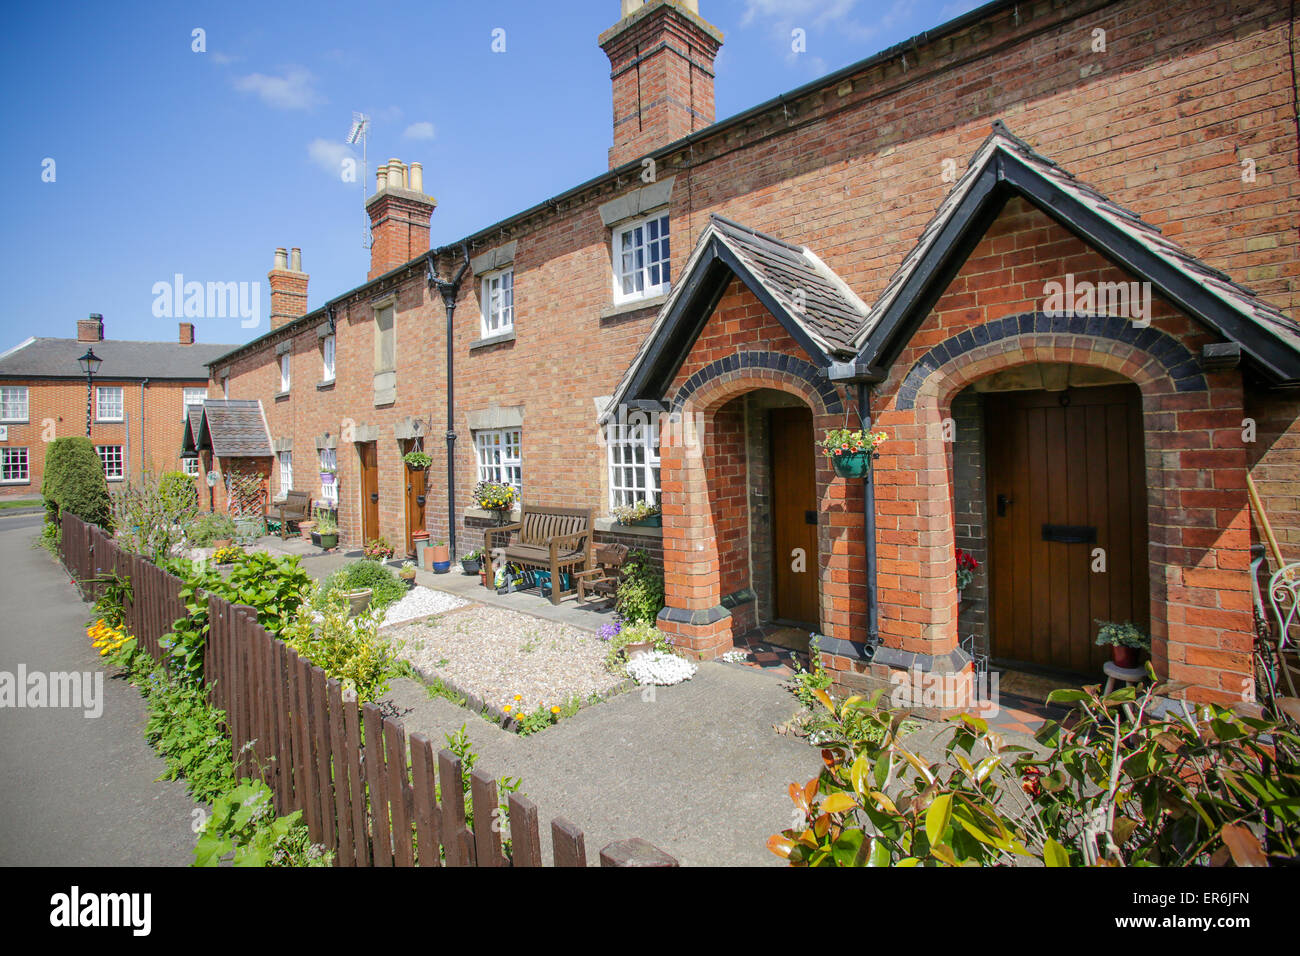 A row of almshouses in an English rural community Stock Photo